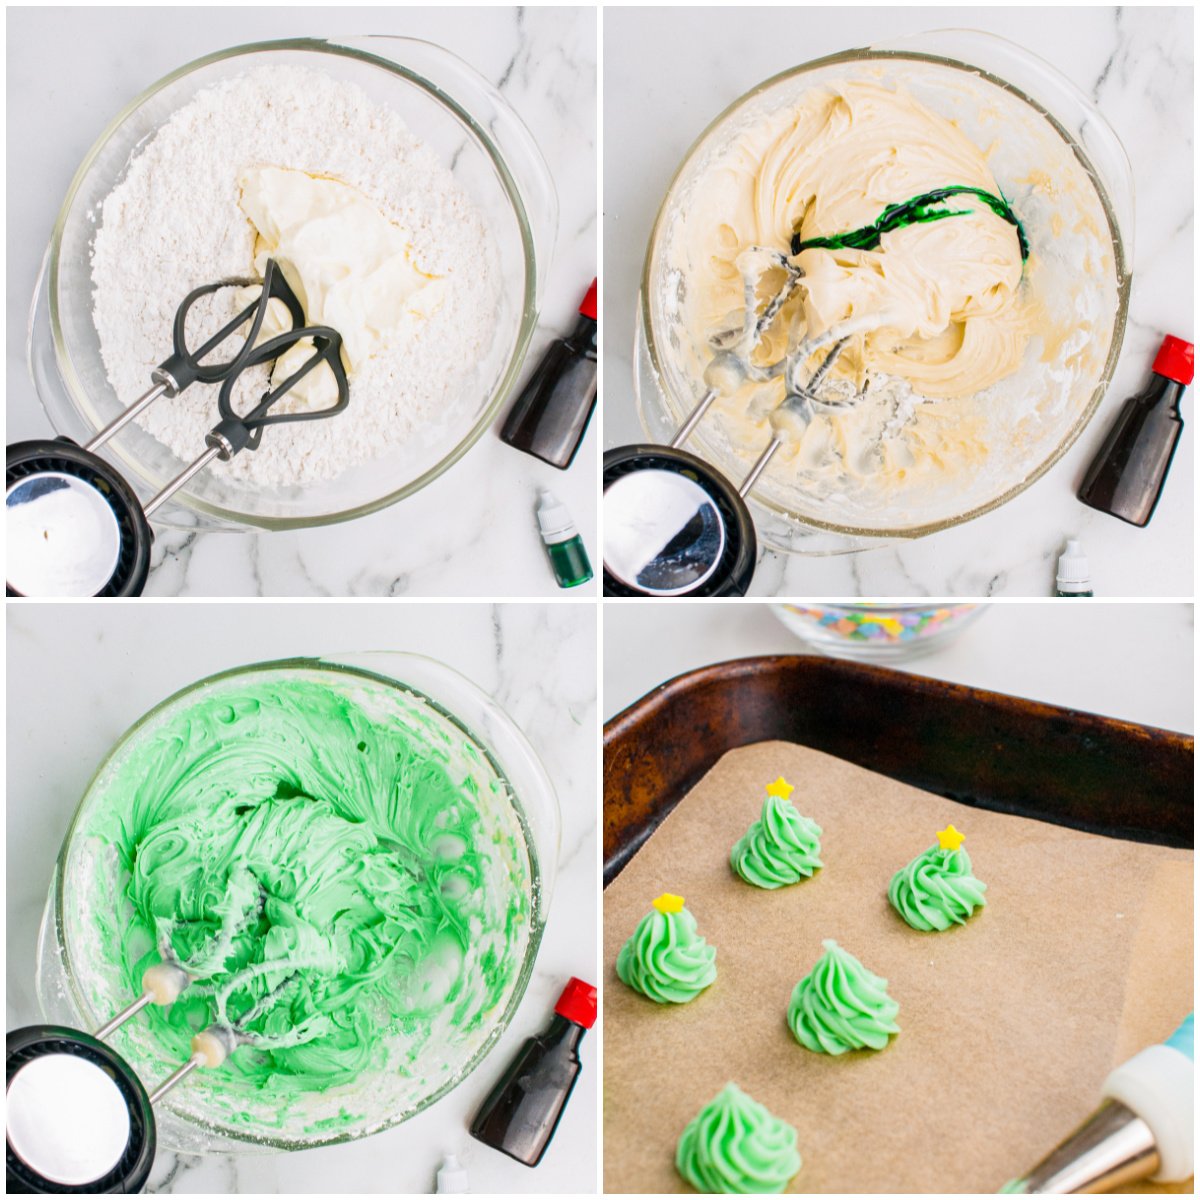 Step by step photos on how to make Cream Cheese Mints.